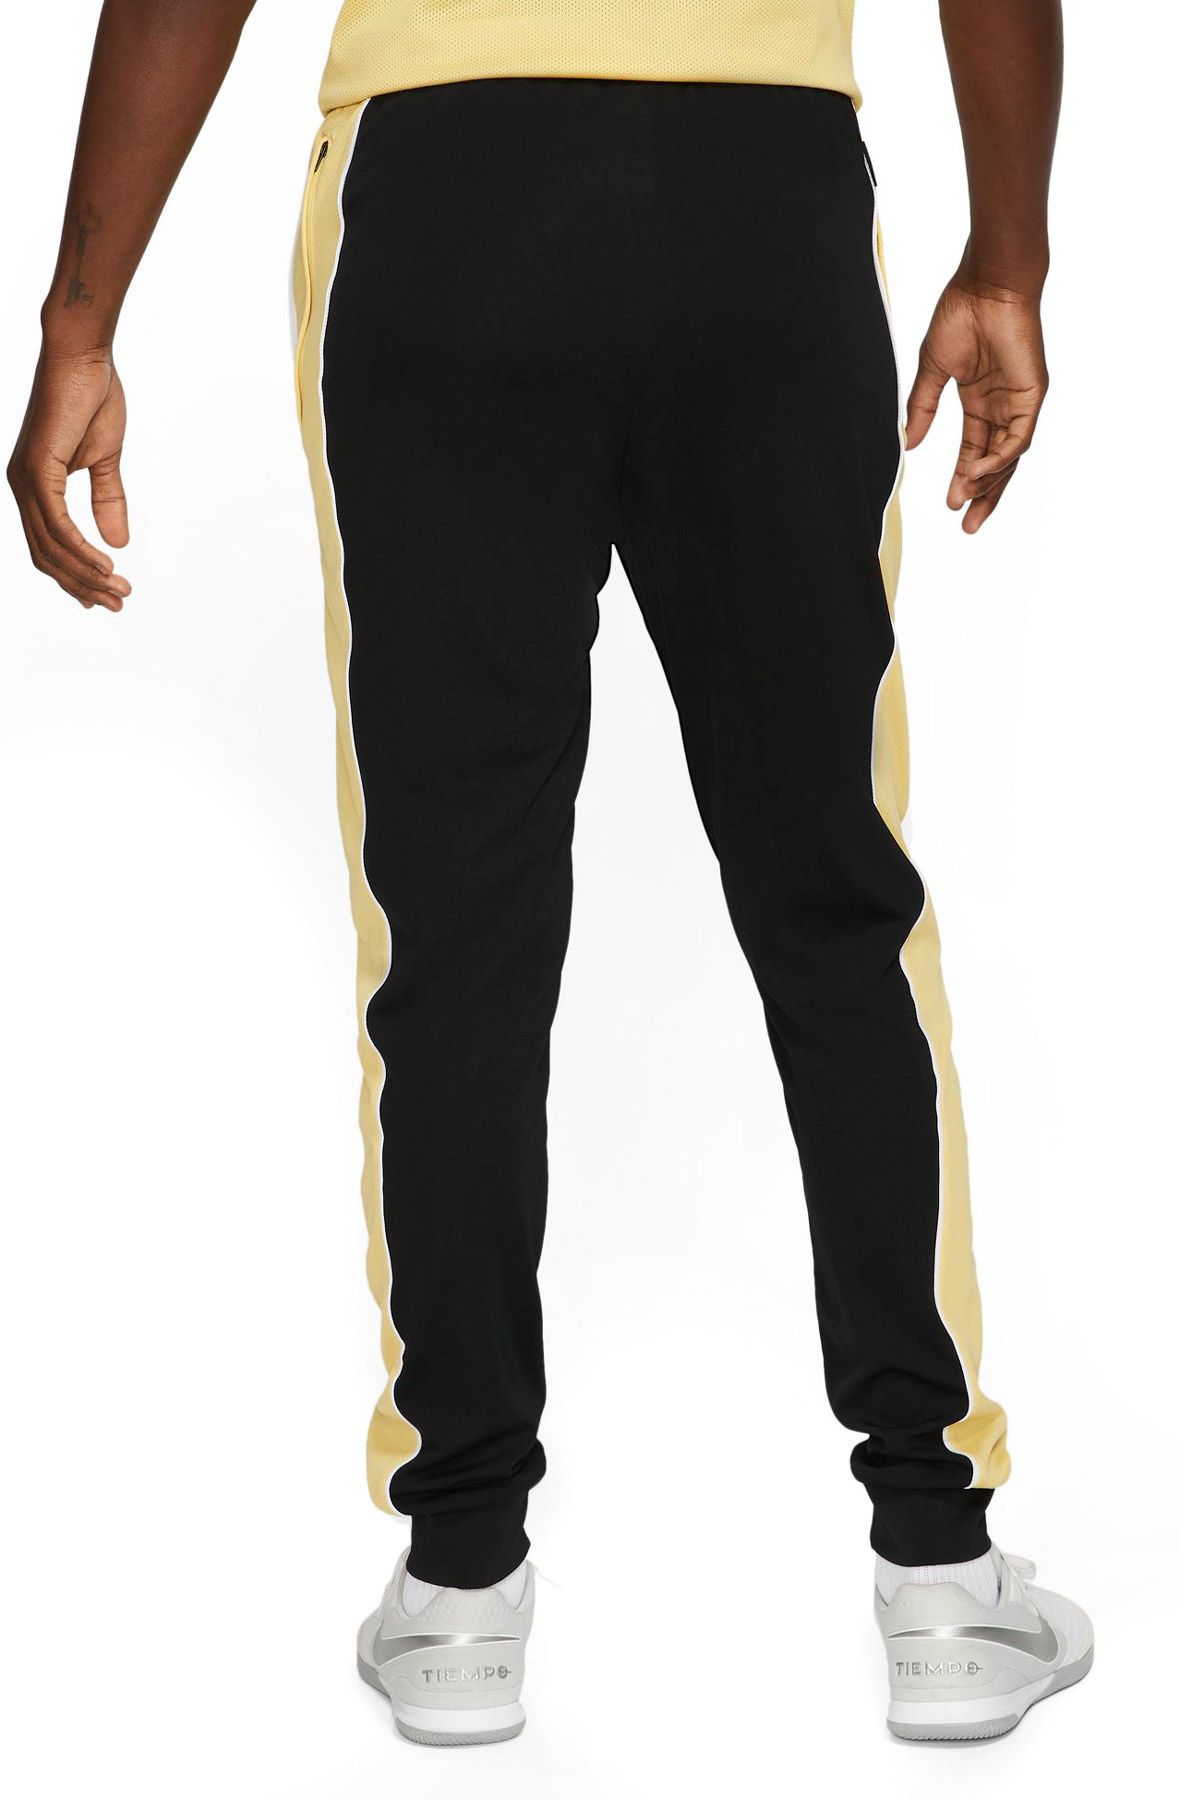 Nike Athletic Pants Women's S L XL 2XL 3XL Black Gold Ankle Zip New without  Tags